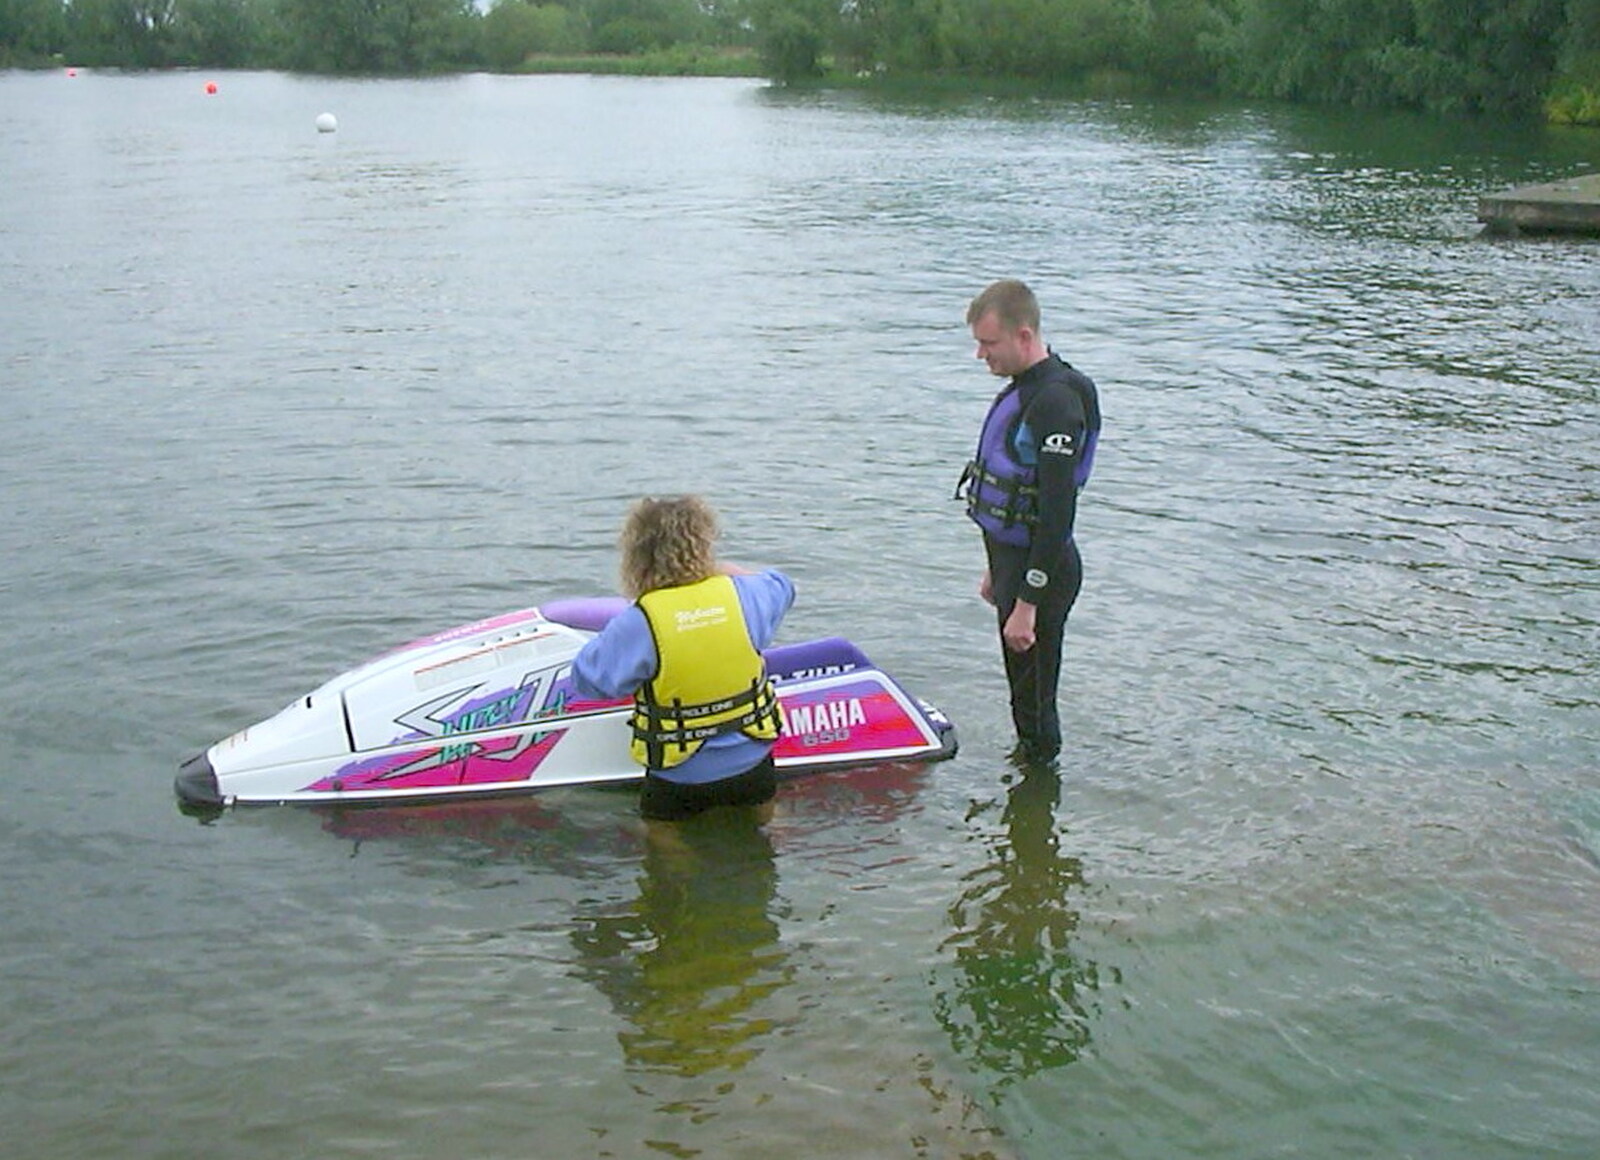 3G Lab Watersports Fun Day, Wyboston, Bedfordshire - 8th June 2002: Nosher gets a bit of jet-ski tuition